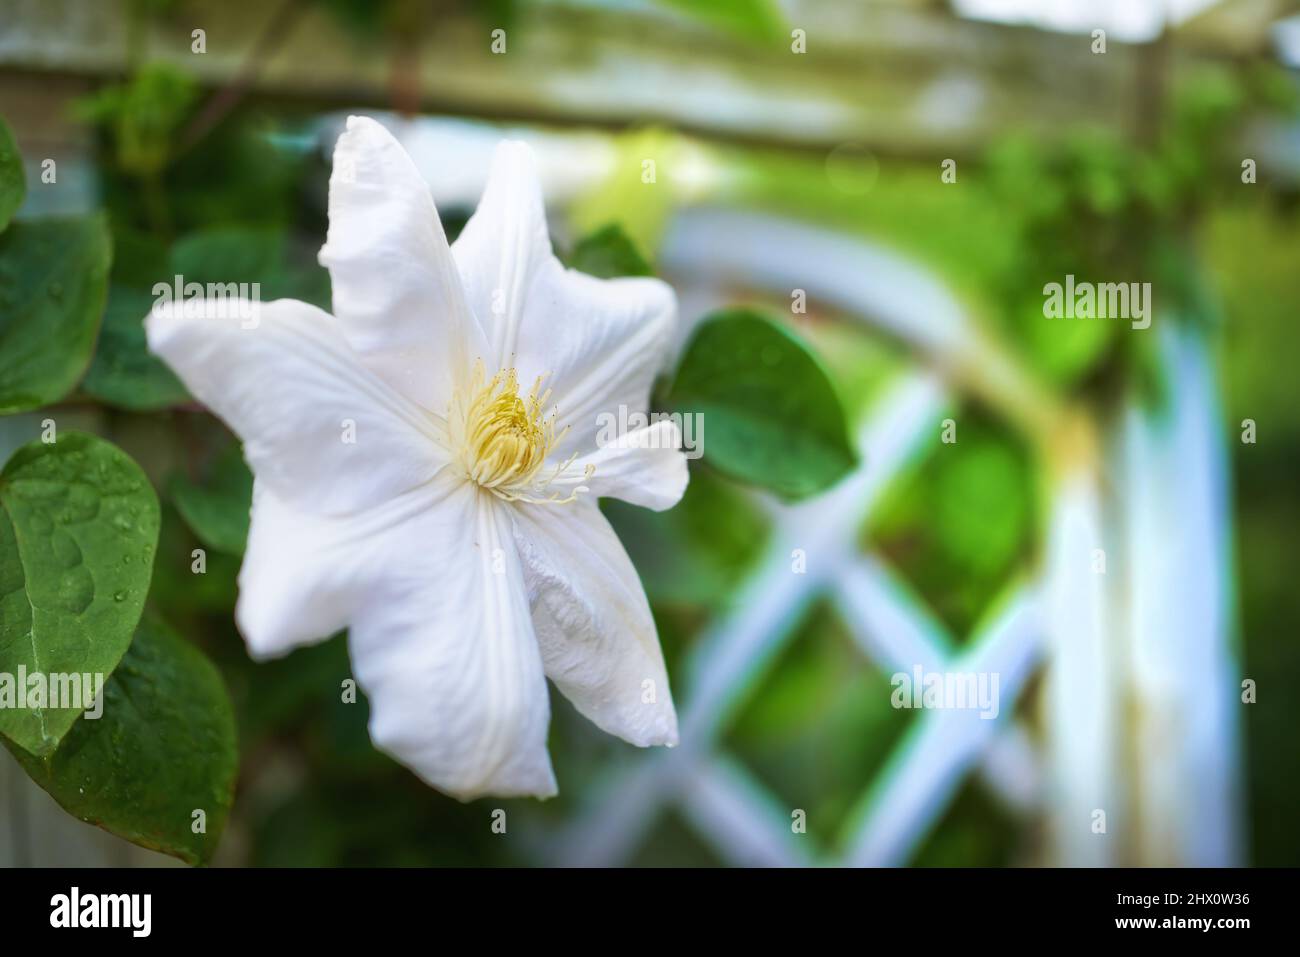 Clematis. The genus is composed of mostly vigorous, woody, climbing vines lianas. The woody stems are quite fragile until several years old. Leaves Stock Photo